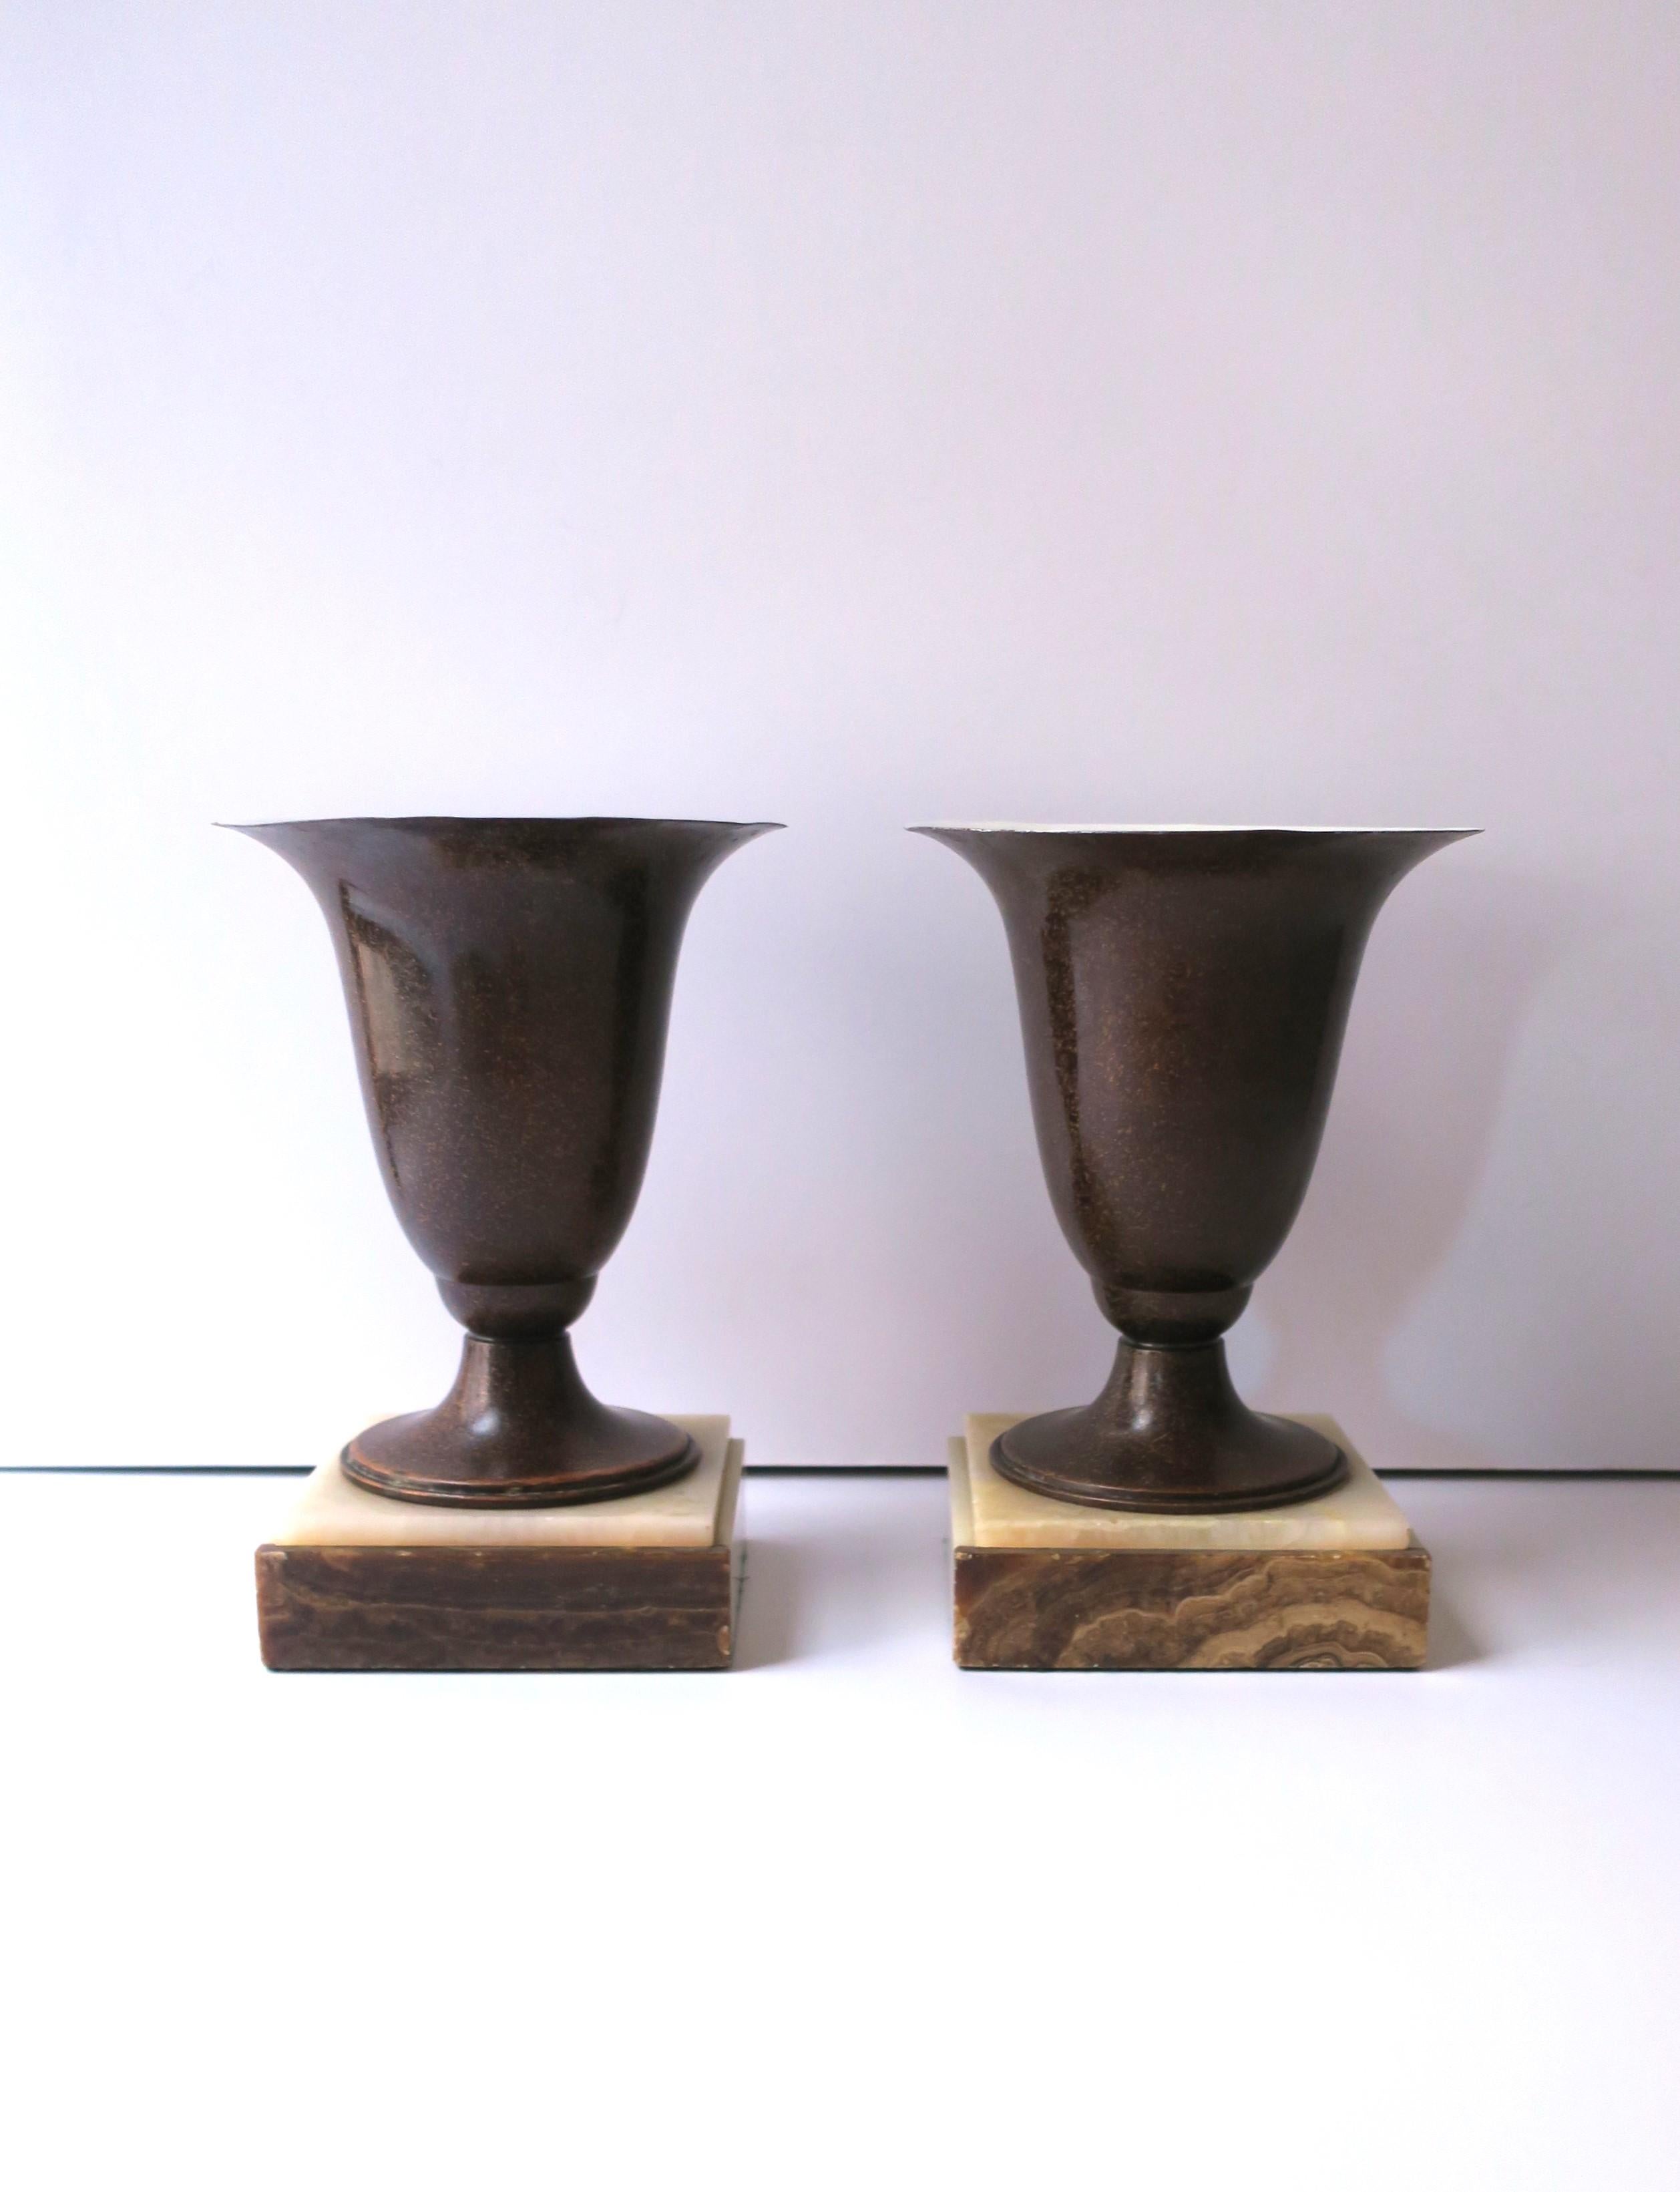 Unknown Art Deco Urn Form Table Lamps Onyx Marble Bases, Pair For Sale